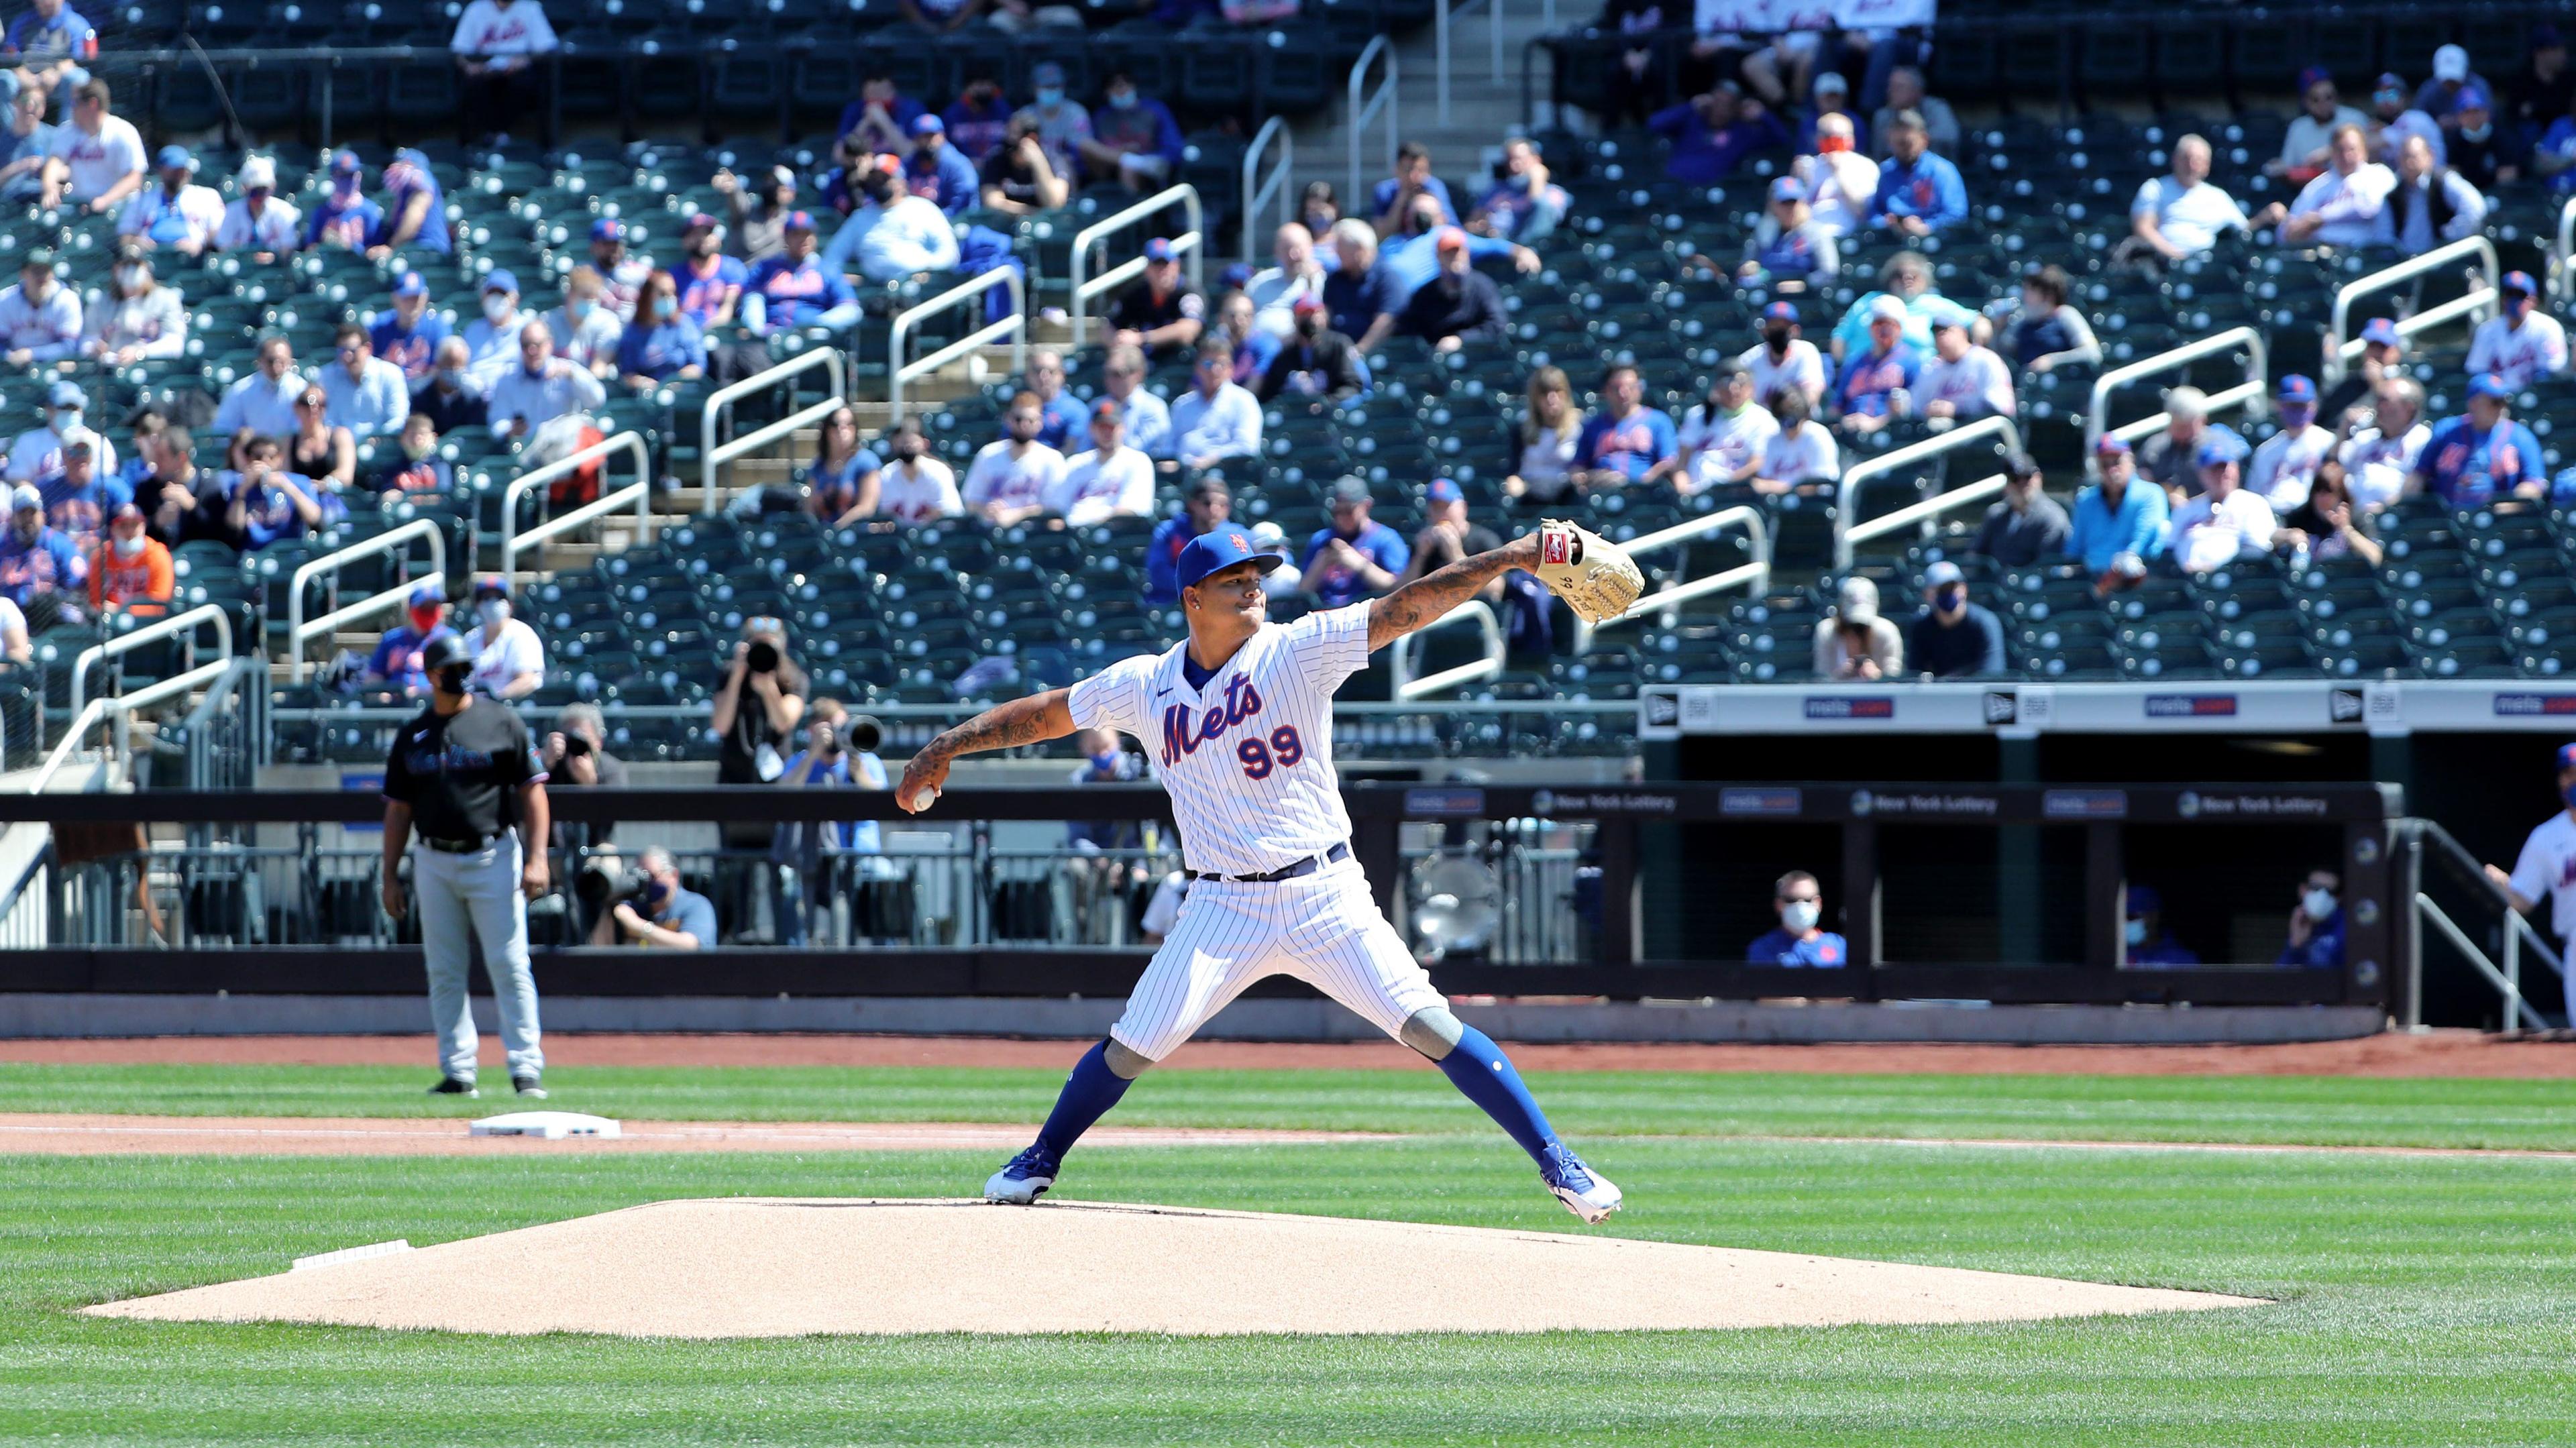 Taijuan Walker, pitches against the Marlins, in the first inning Thursday, April 8, 2021 Opening Day At Citi Field / © Kevin R. Wexler-NorthJersey.com via Imagn Content Services, LLC